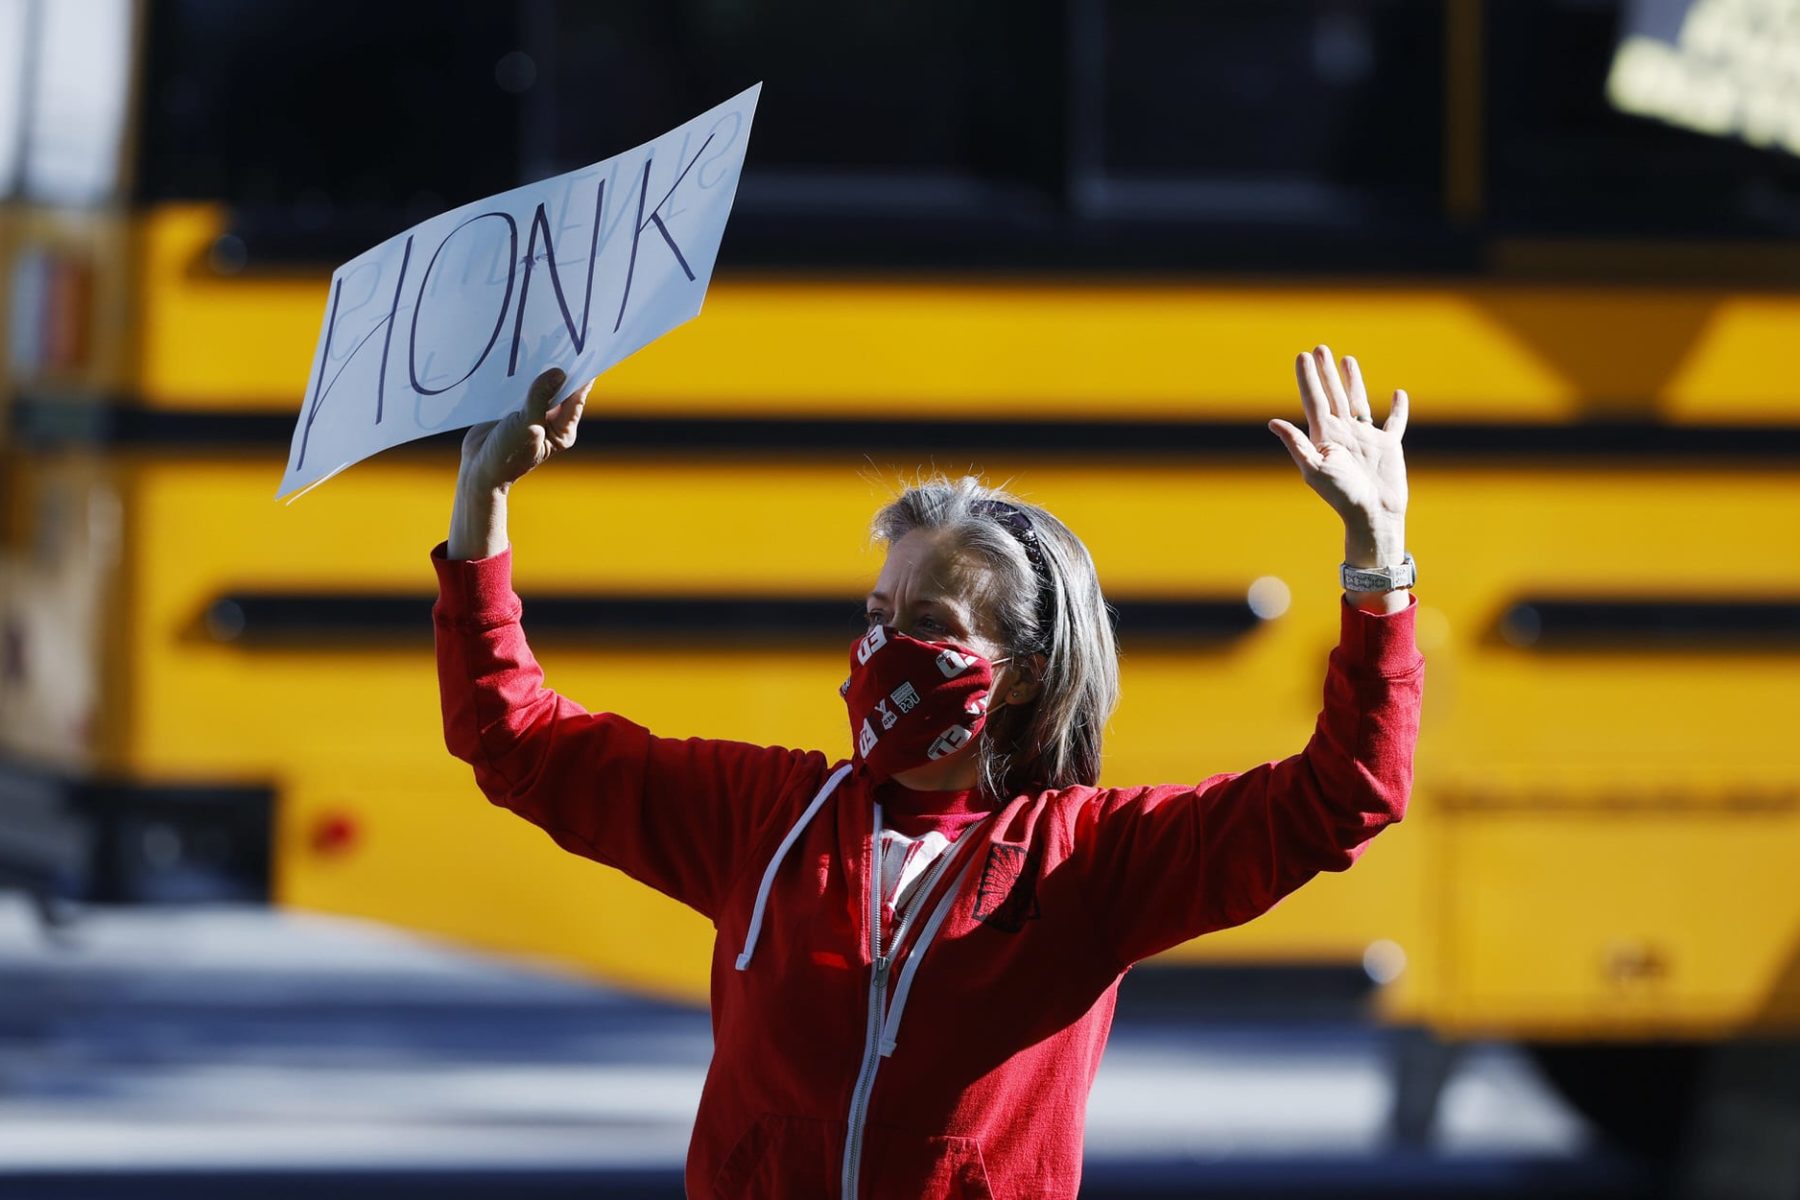 Lara Center, dressed in a red hoodie and holding a sign that says HONK in all caps above her head, protests in Denver to protect public schools from budget cuts.